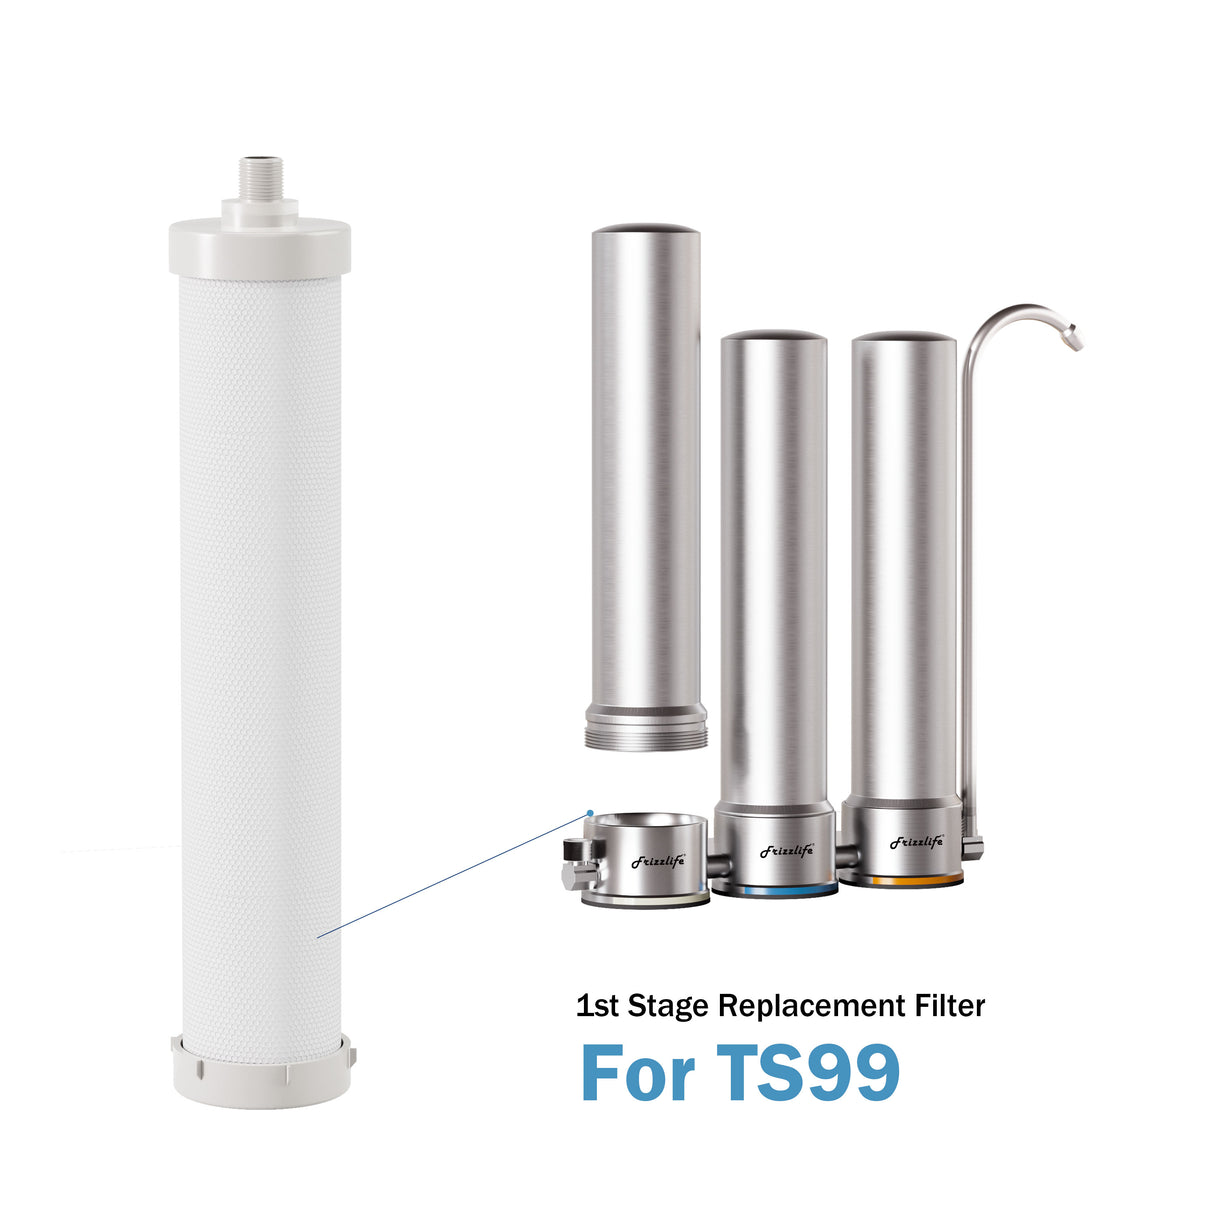 Frizzlife DSFPP (1st Stage) Replacement Filter Cartridge for TS99 Countertop Stainless Steel Water Filter System